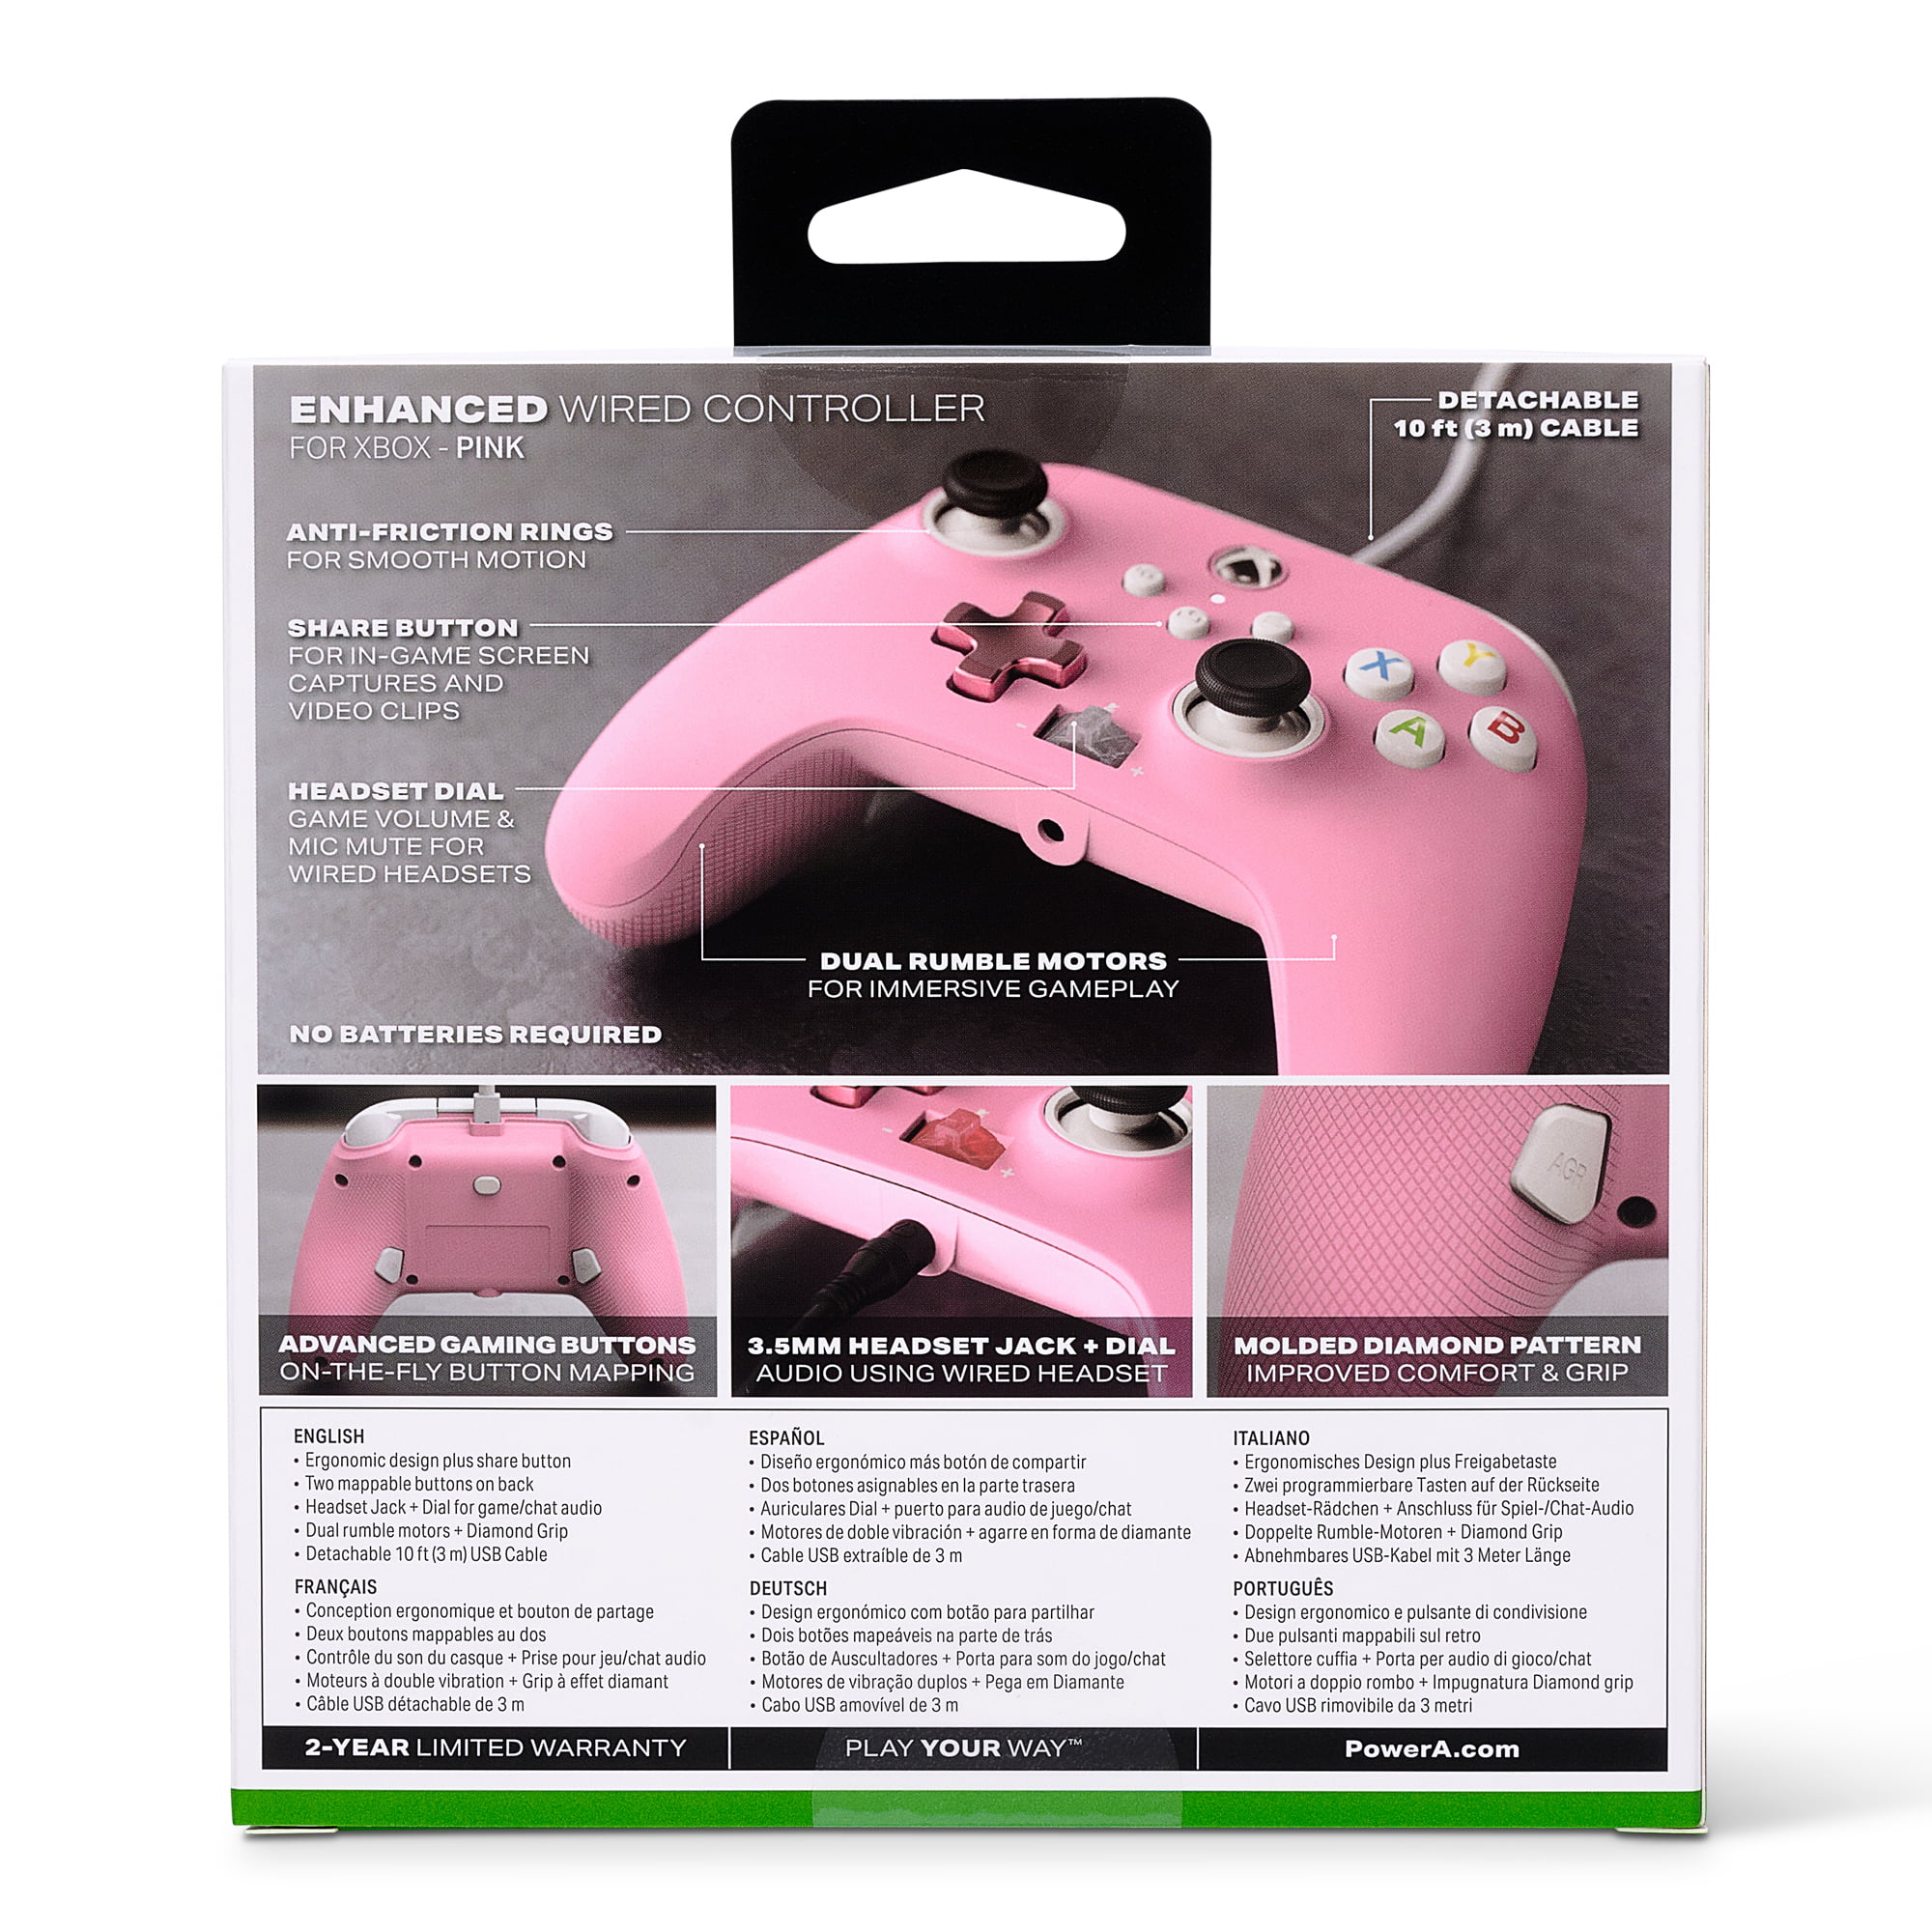 Xbox Series XS & PC Sonic Speed REALMz™ Wired Controller